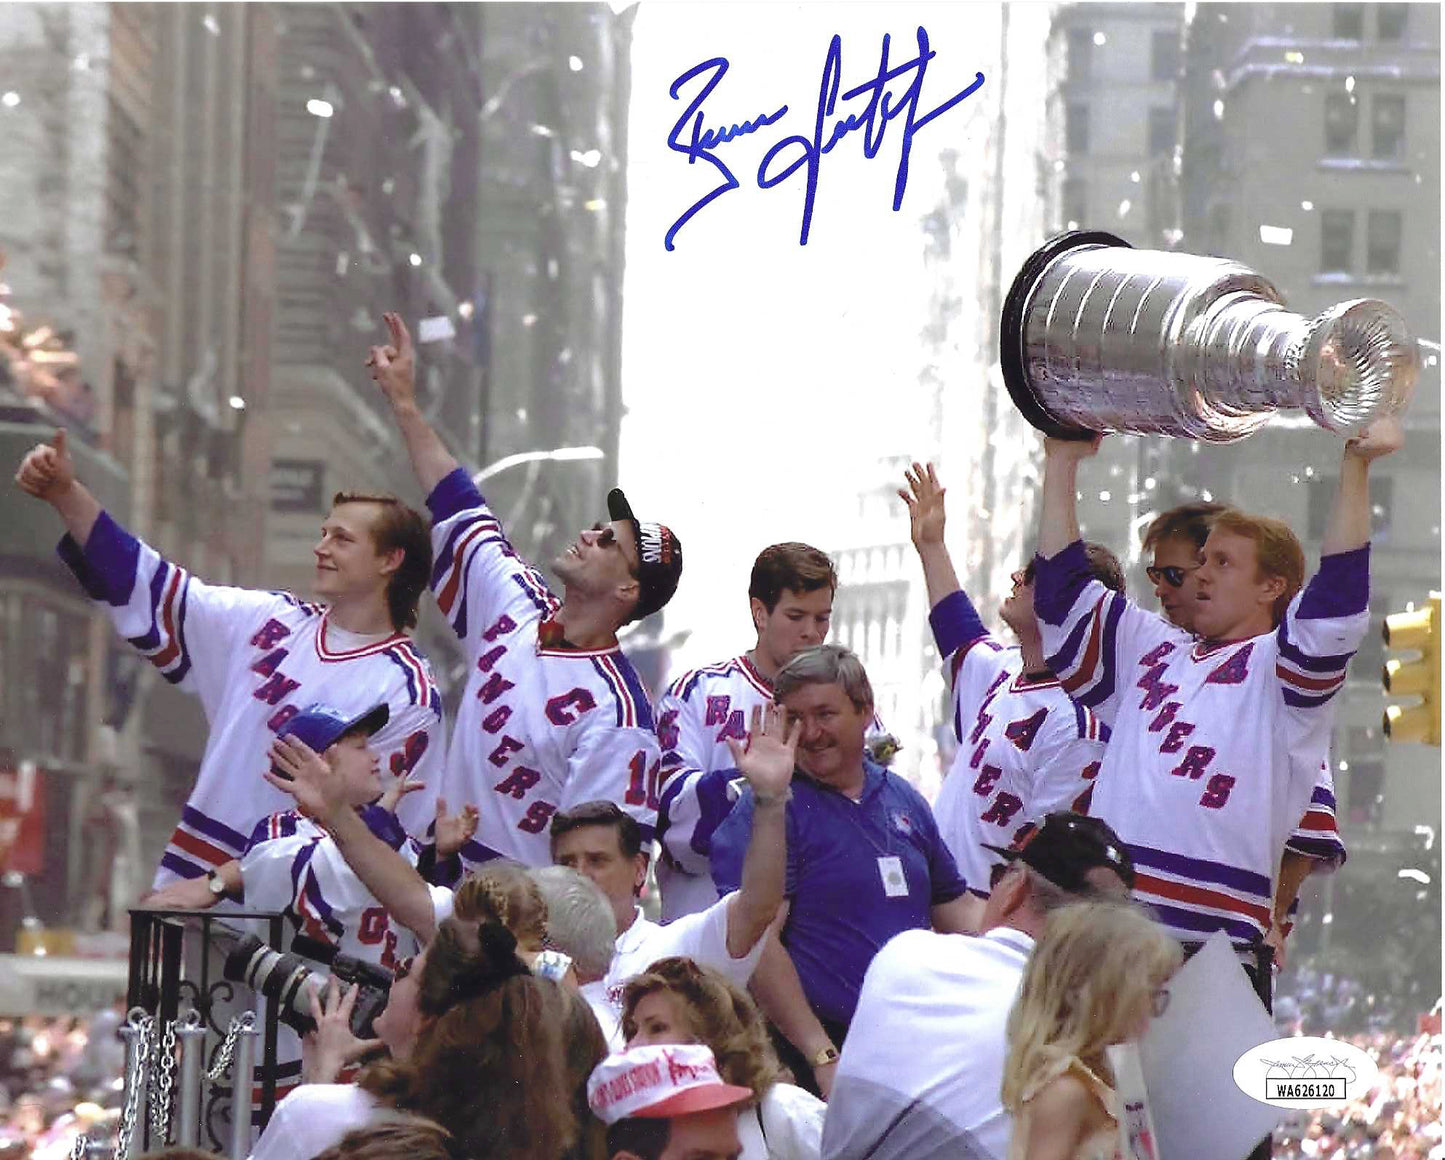 New York Rangers Brian Leetch Autographed 1994 Stanley Cup Victory Parade Celebration 8x10 Photo Picture on June 17, 1994 Media 1 of 4